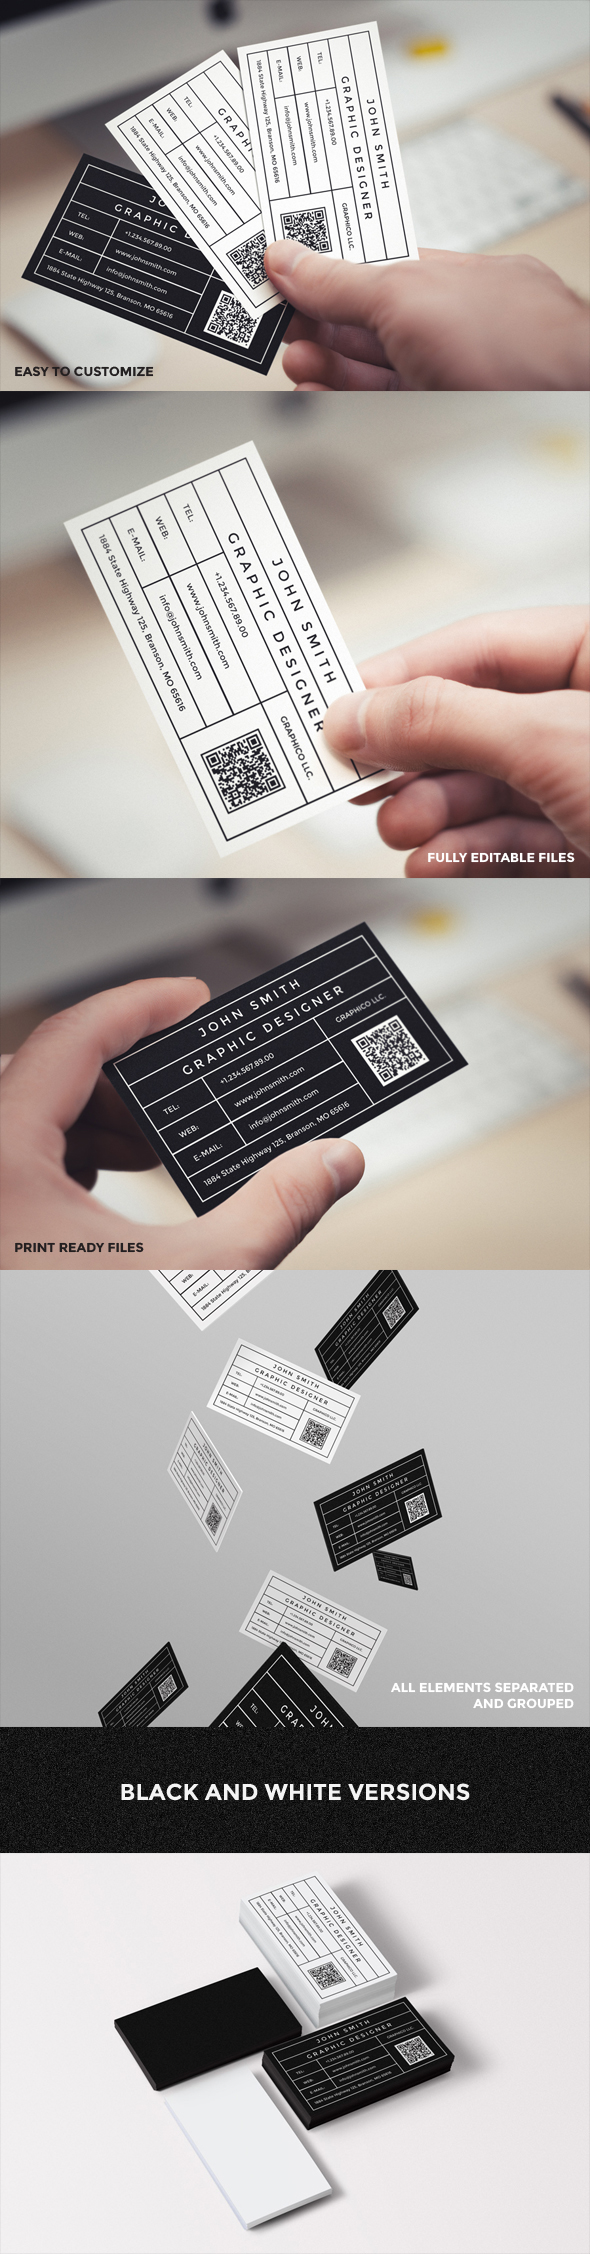 personal simple minimal flat corporate template business business card blackwhite black and White minimalist 2in1